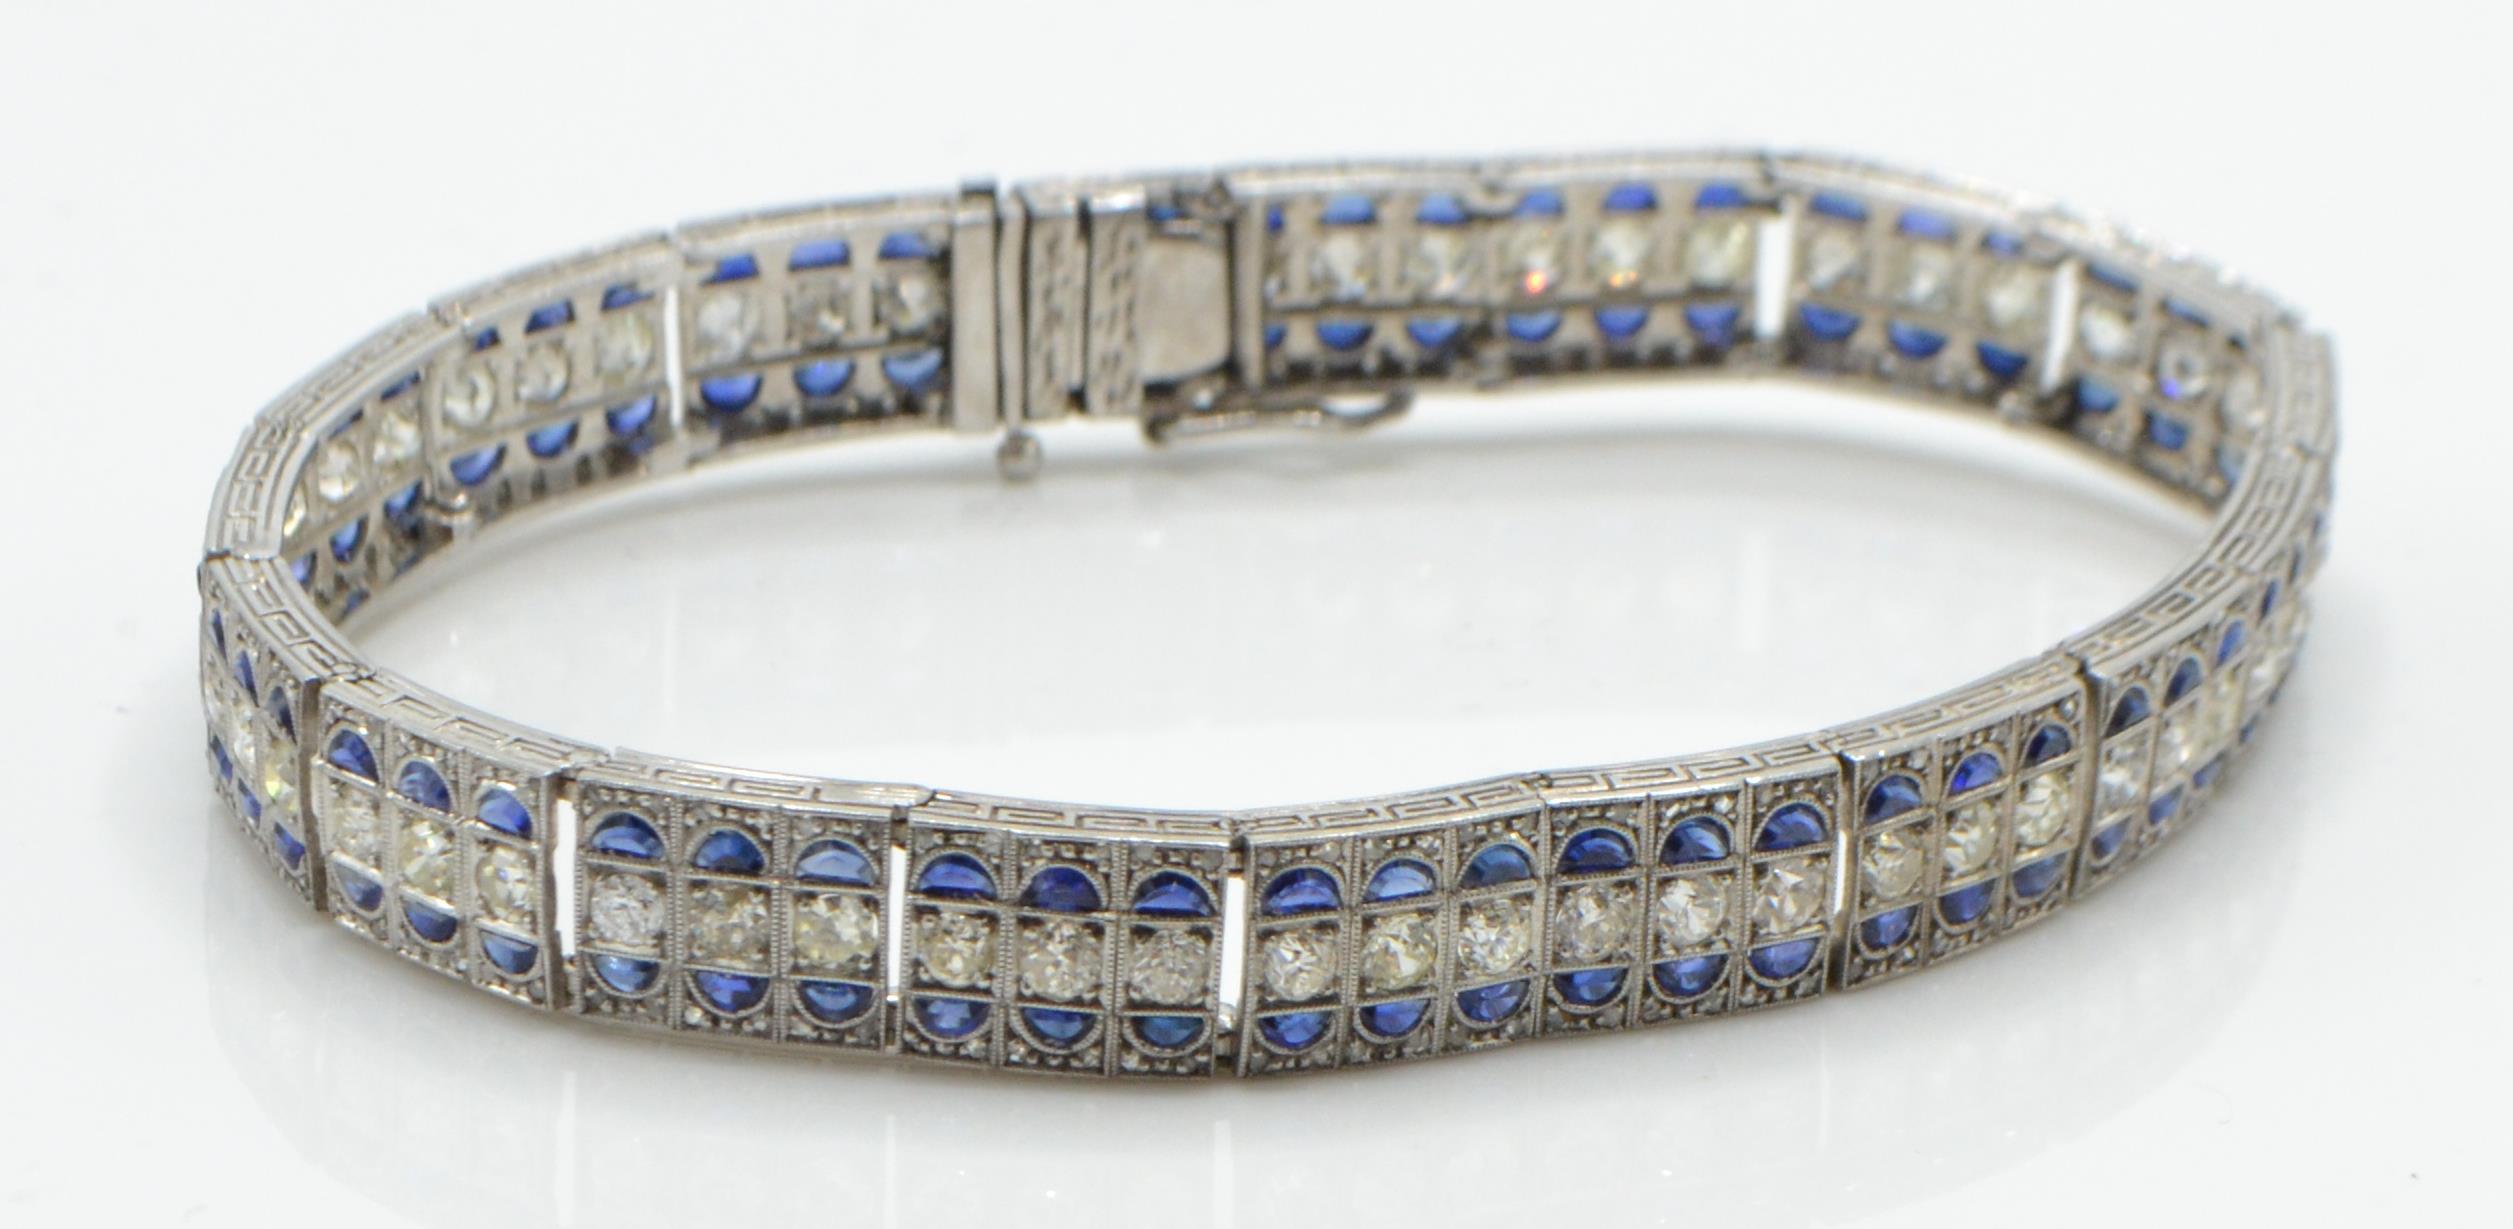 An 18t gold sapphire and diamond bracelet - Image 2 of 9